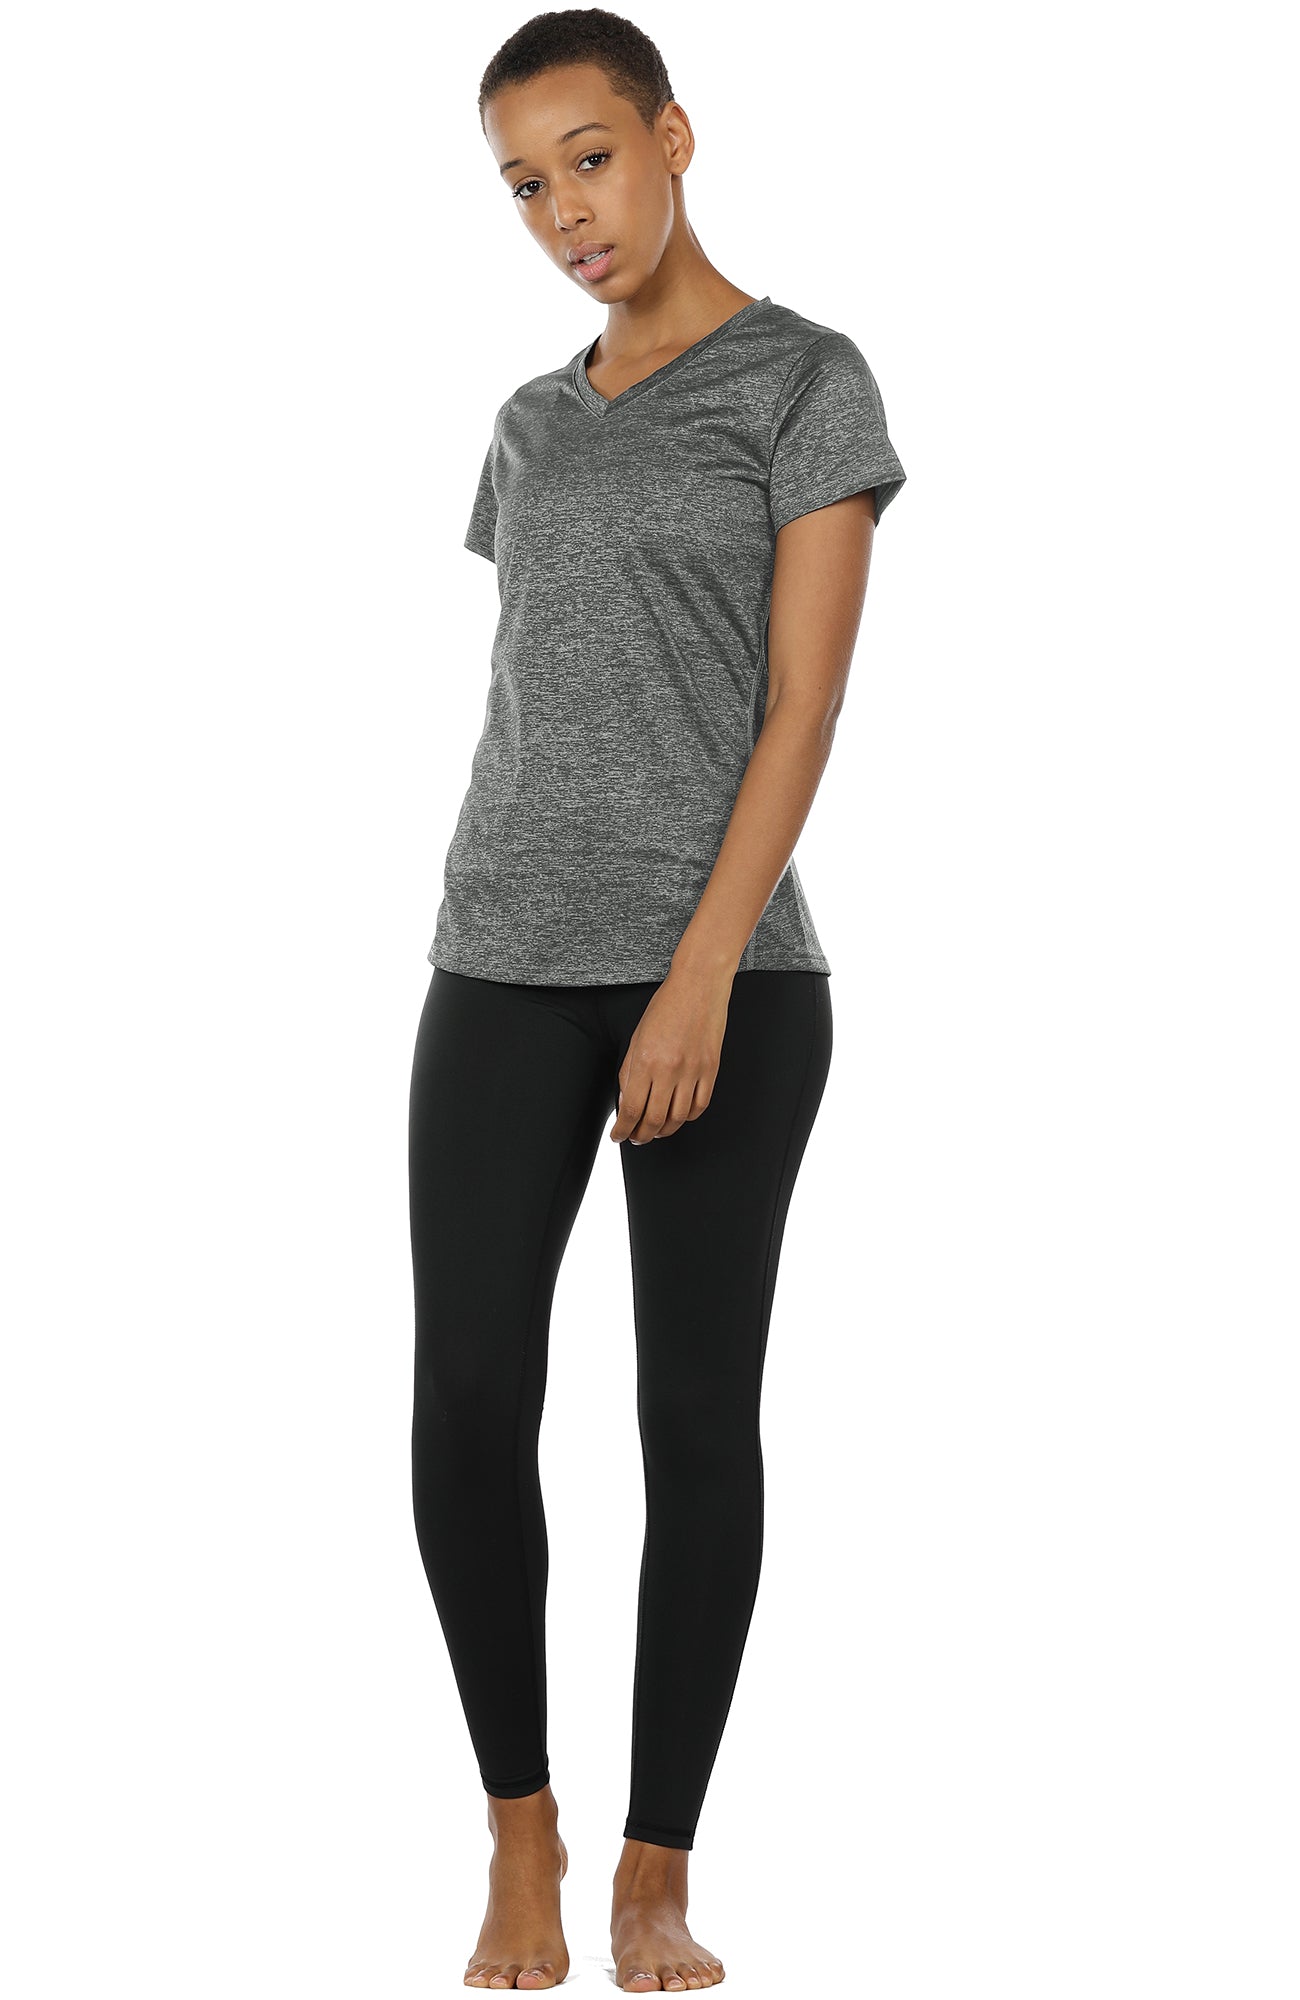 icyzone Long Sleeve Knit Tops for Women - V Neck Undershirts Casual T –  icyzonesports